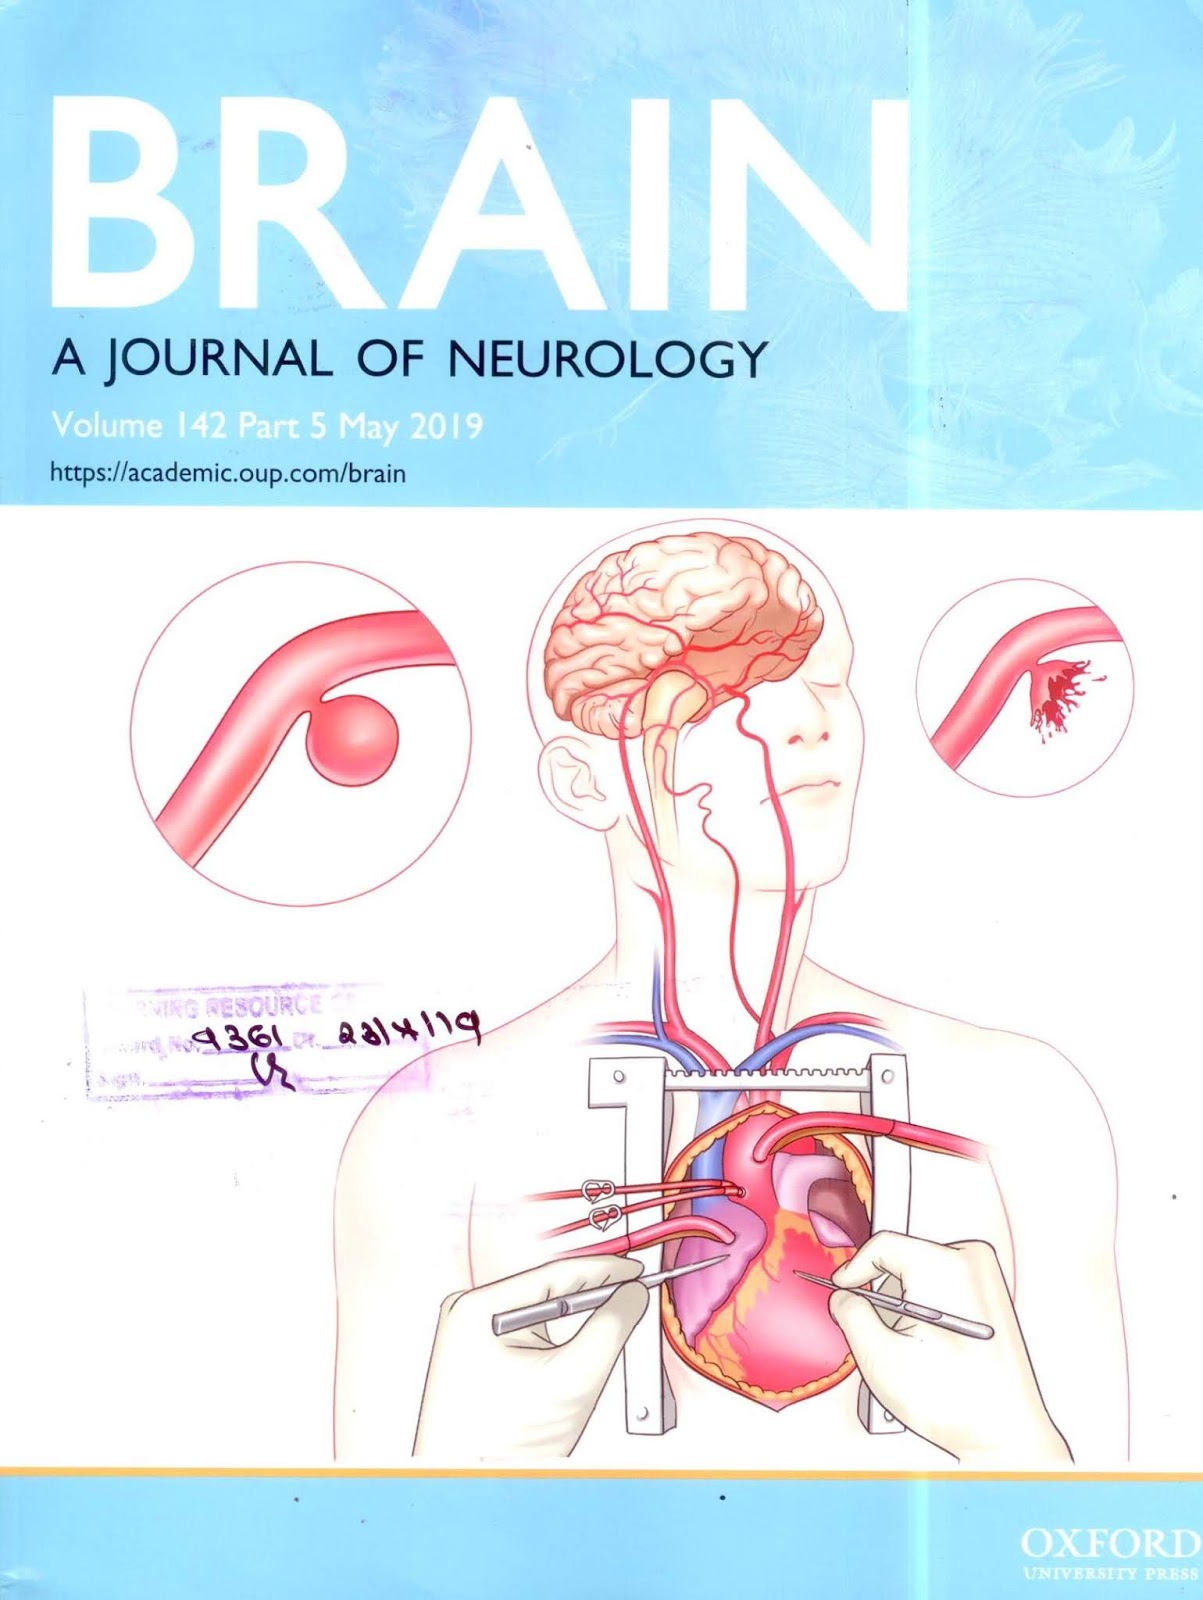 https://academic.oup.com/brain/issue/142/5